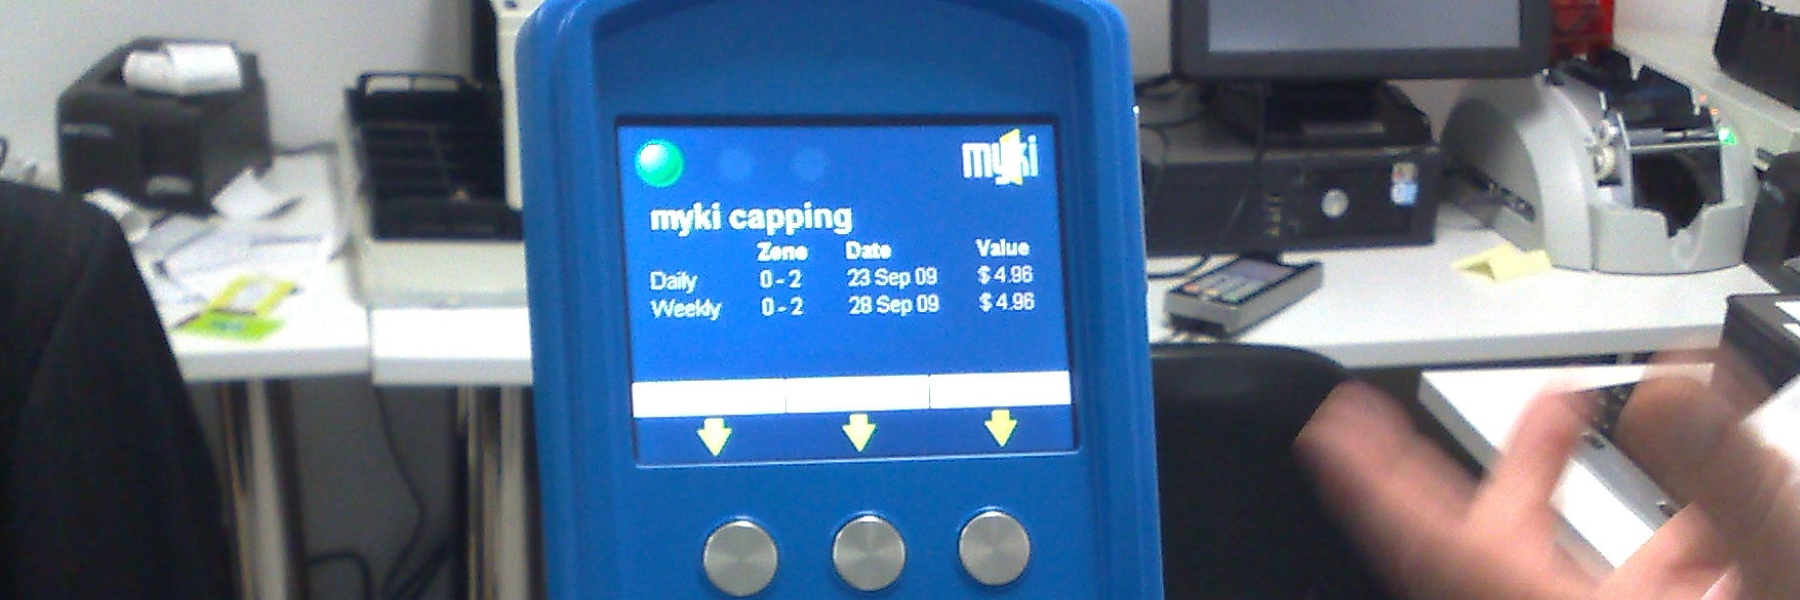 Myki test centre: Daily and weekly capping